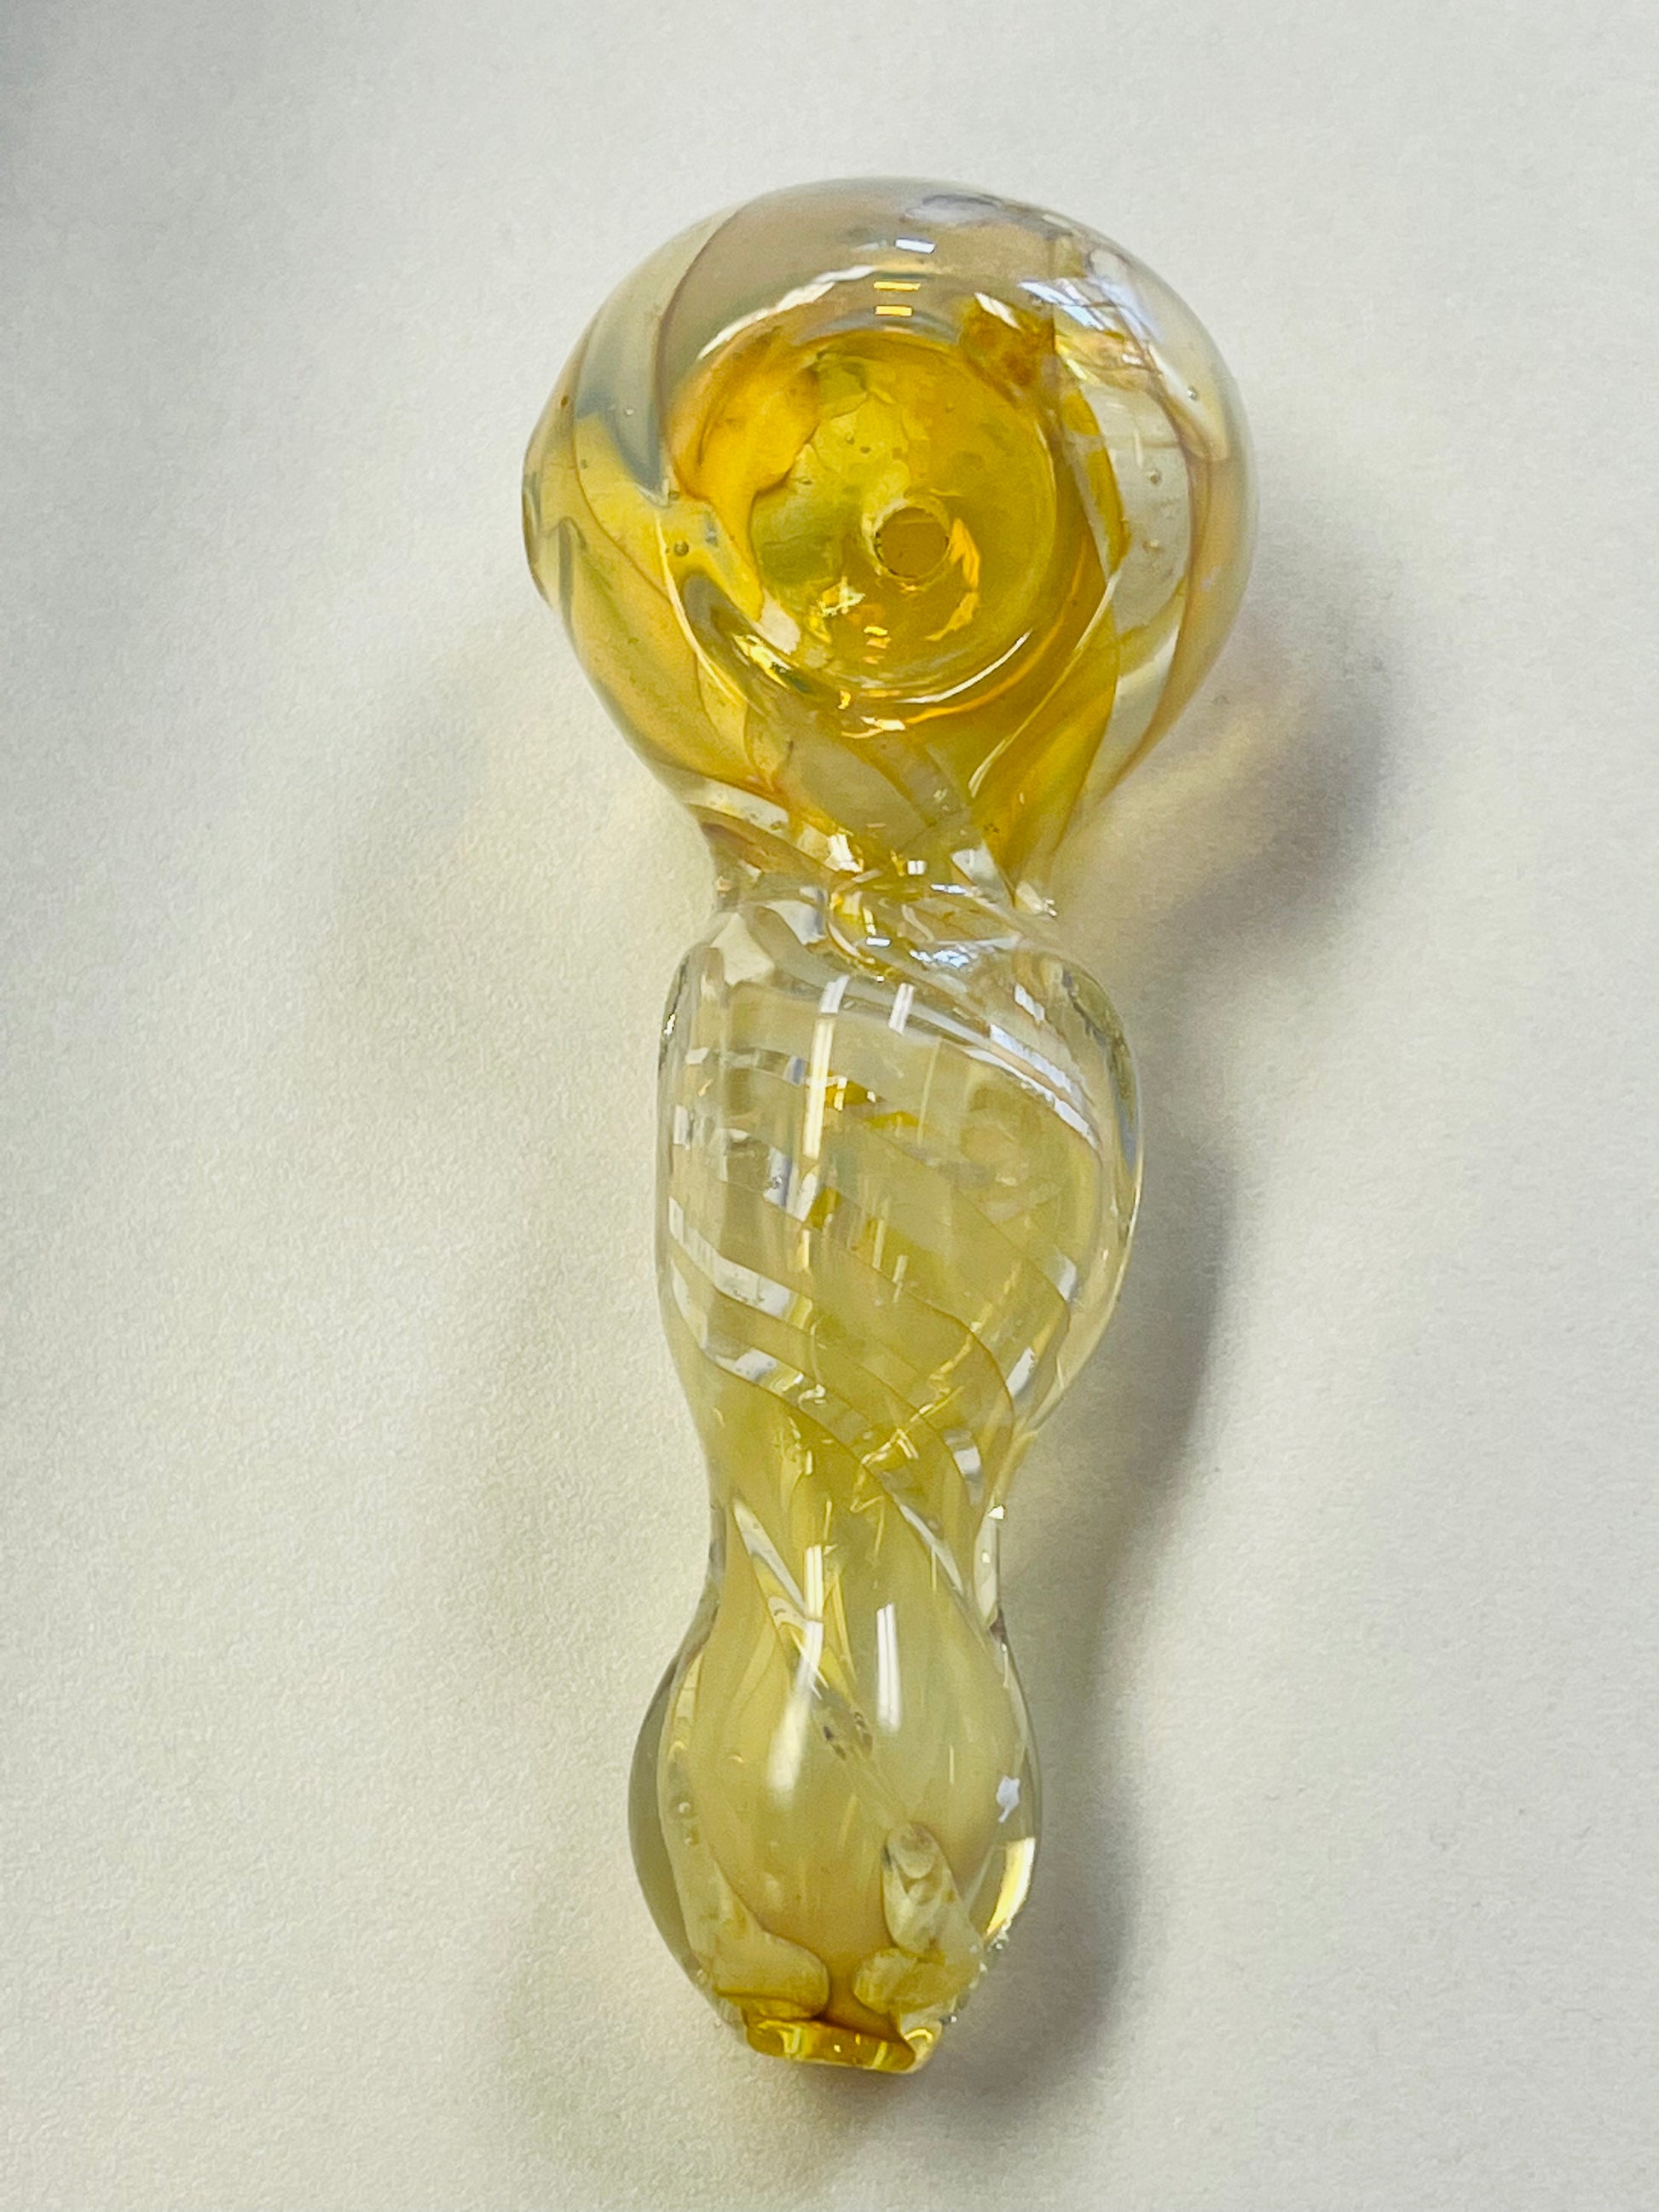 3.5" Clear with Designs Hand Bowl yoga smokes yoga studio, delivery, delivery near me, yoga smokes smoke shop, find smoke shop, head shop near me, yoga studio, headshop, head shop, local smoke shop, psl, psl smoke shop, smoke shop, smokeshop, yoga, yoga studio, dispensary, local dispensary, smokeshop near me, port saint lucie, florida, port st lucie, lounge, life, highlife, love, stoned, highsociety. Yoga Smokes